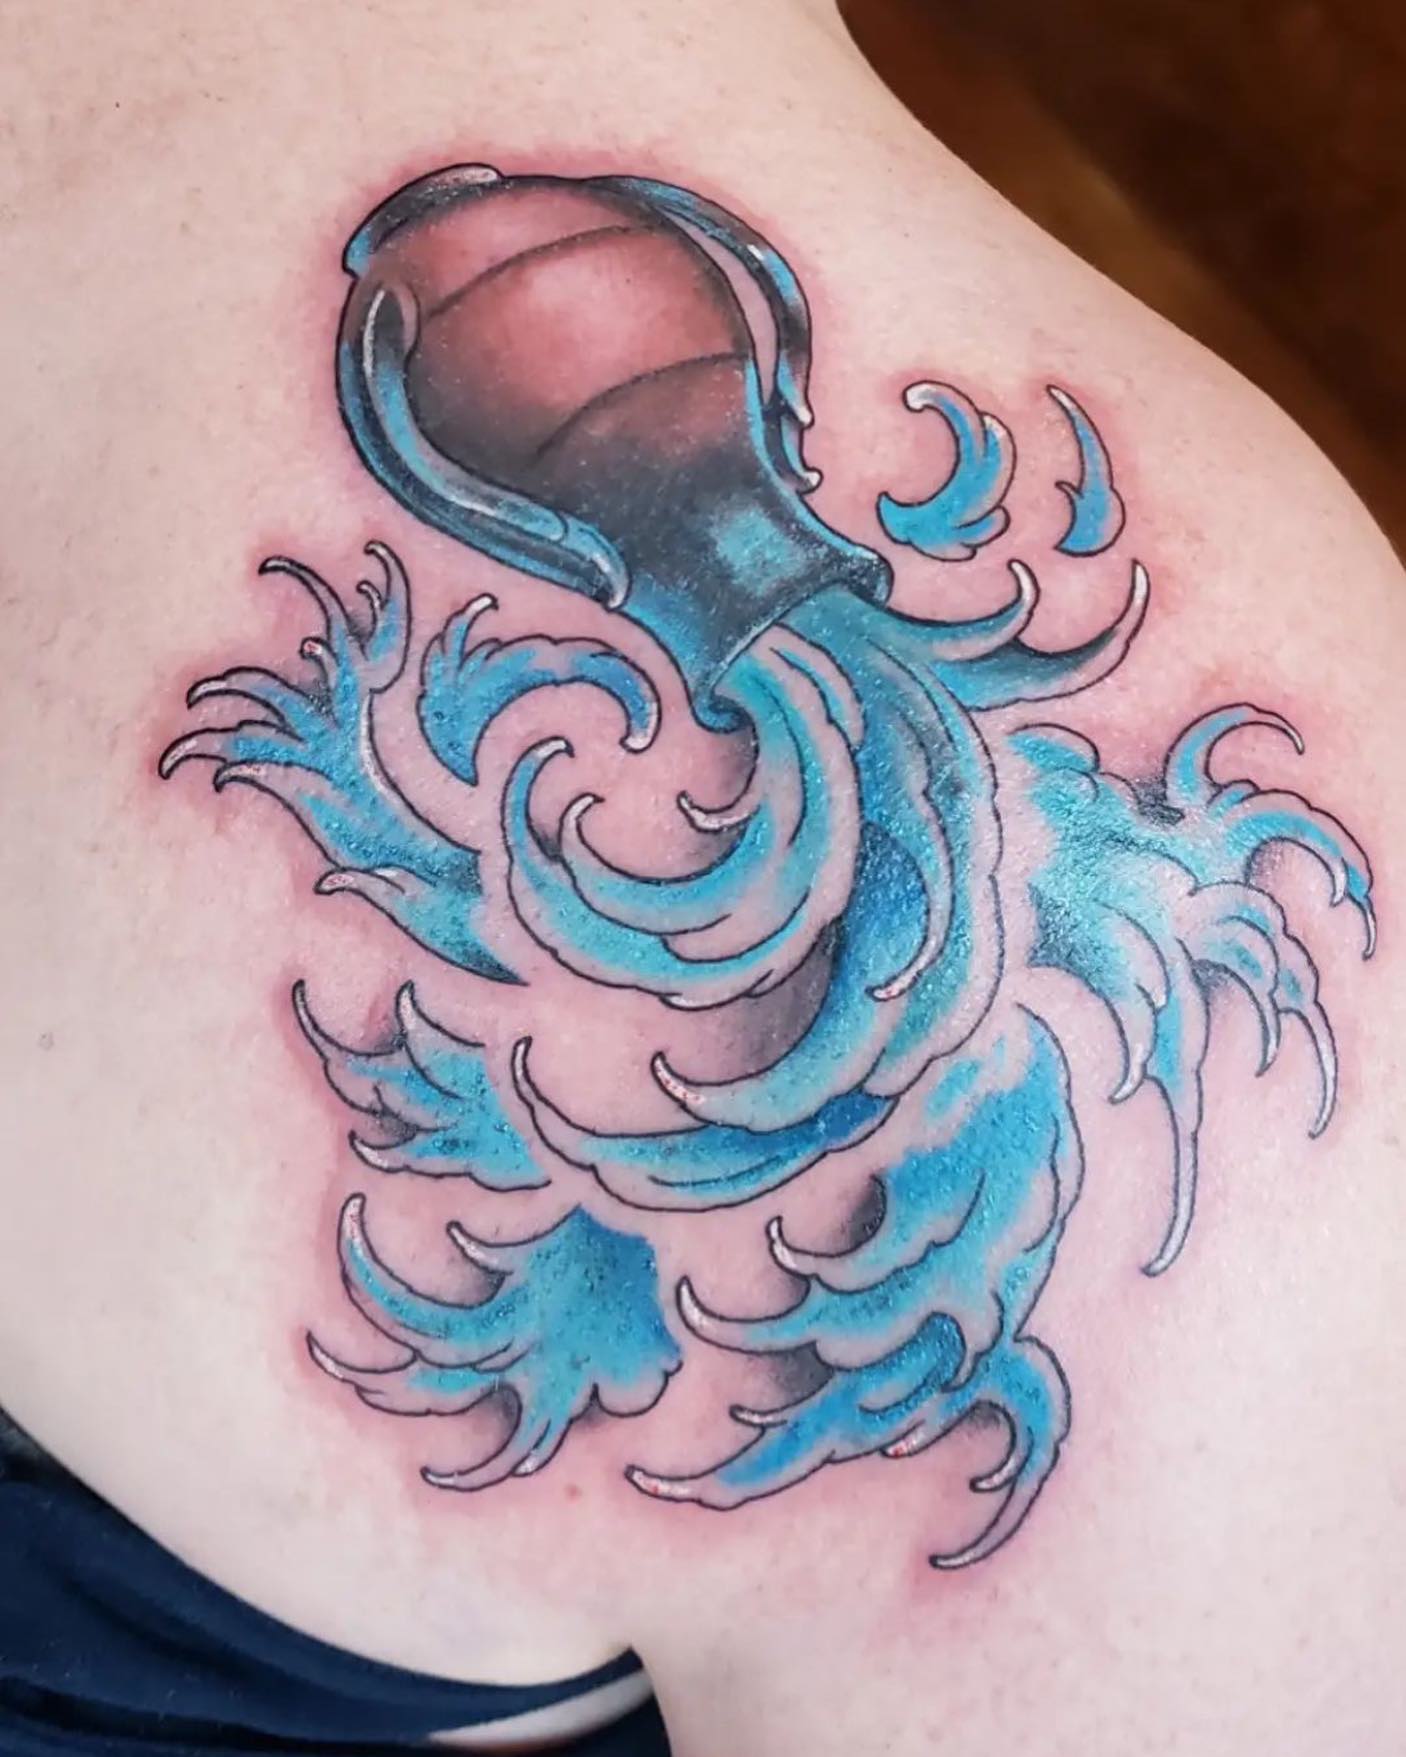 Water drops are all over the place! This tattoo may give the meaning that you, as an Aquarius person, spread kindness to everyone you come across with. It could be a nice tattoo to get to show your horoscope to everyone aroun you. Blue ink gives it a different and great look by the way.